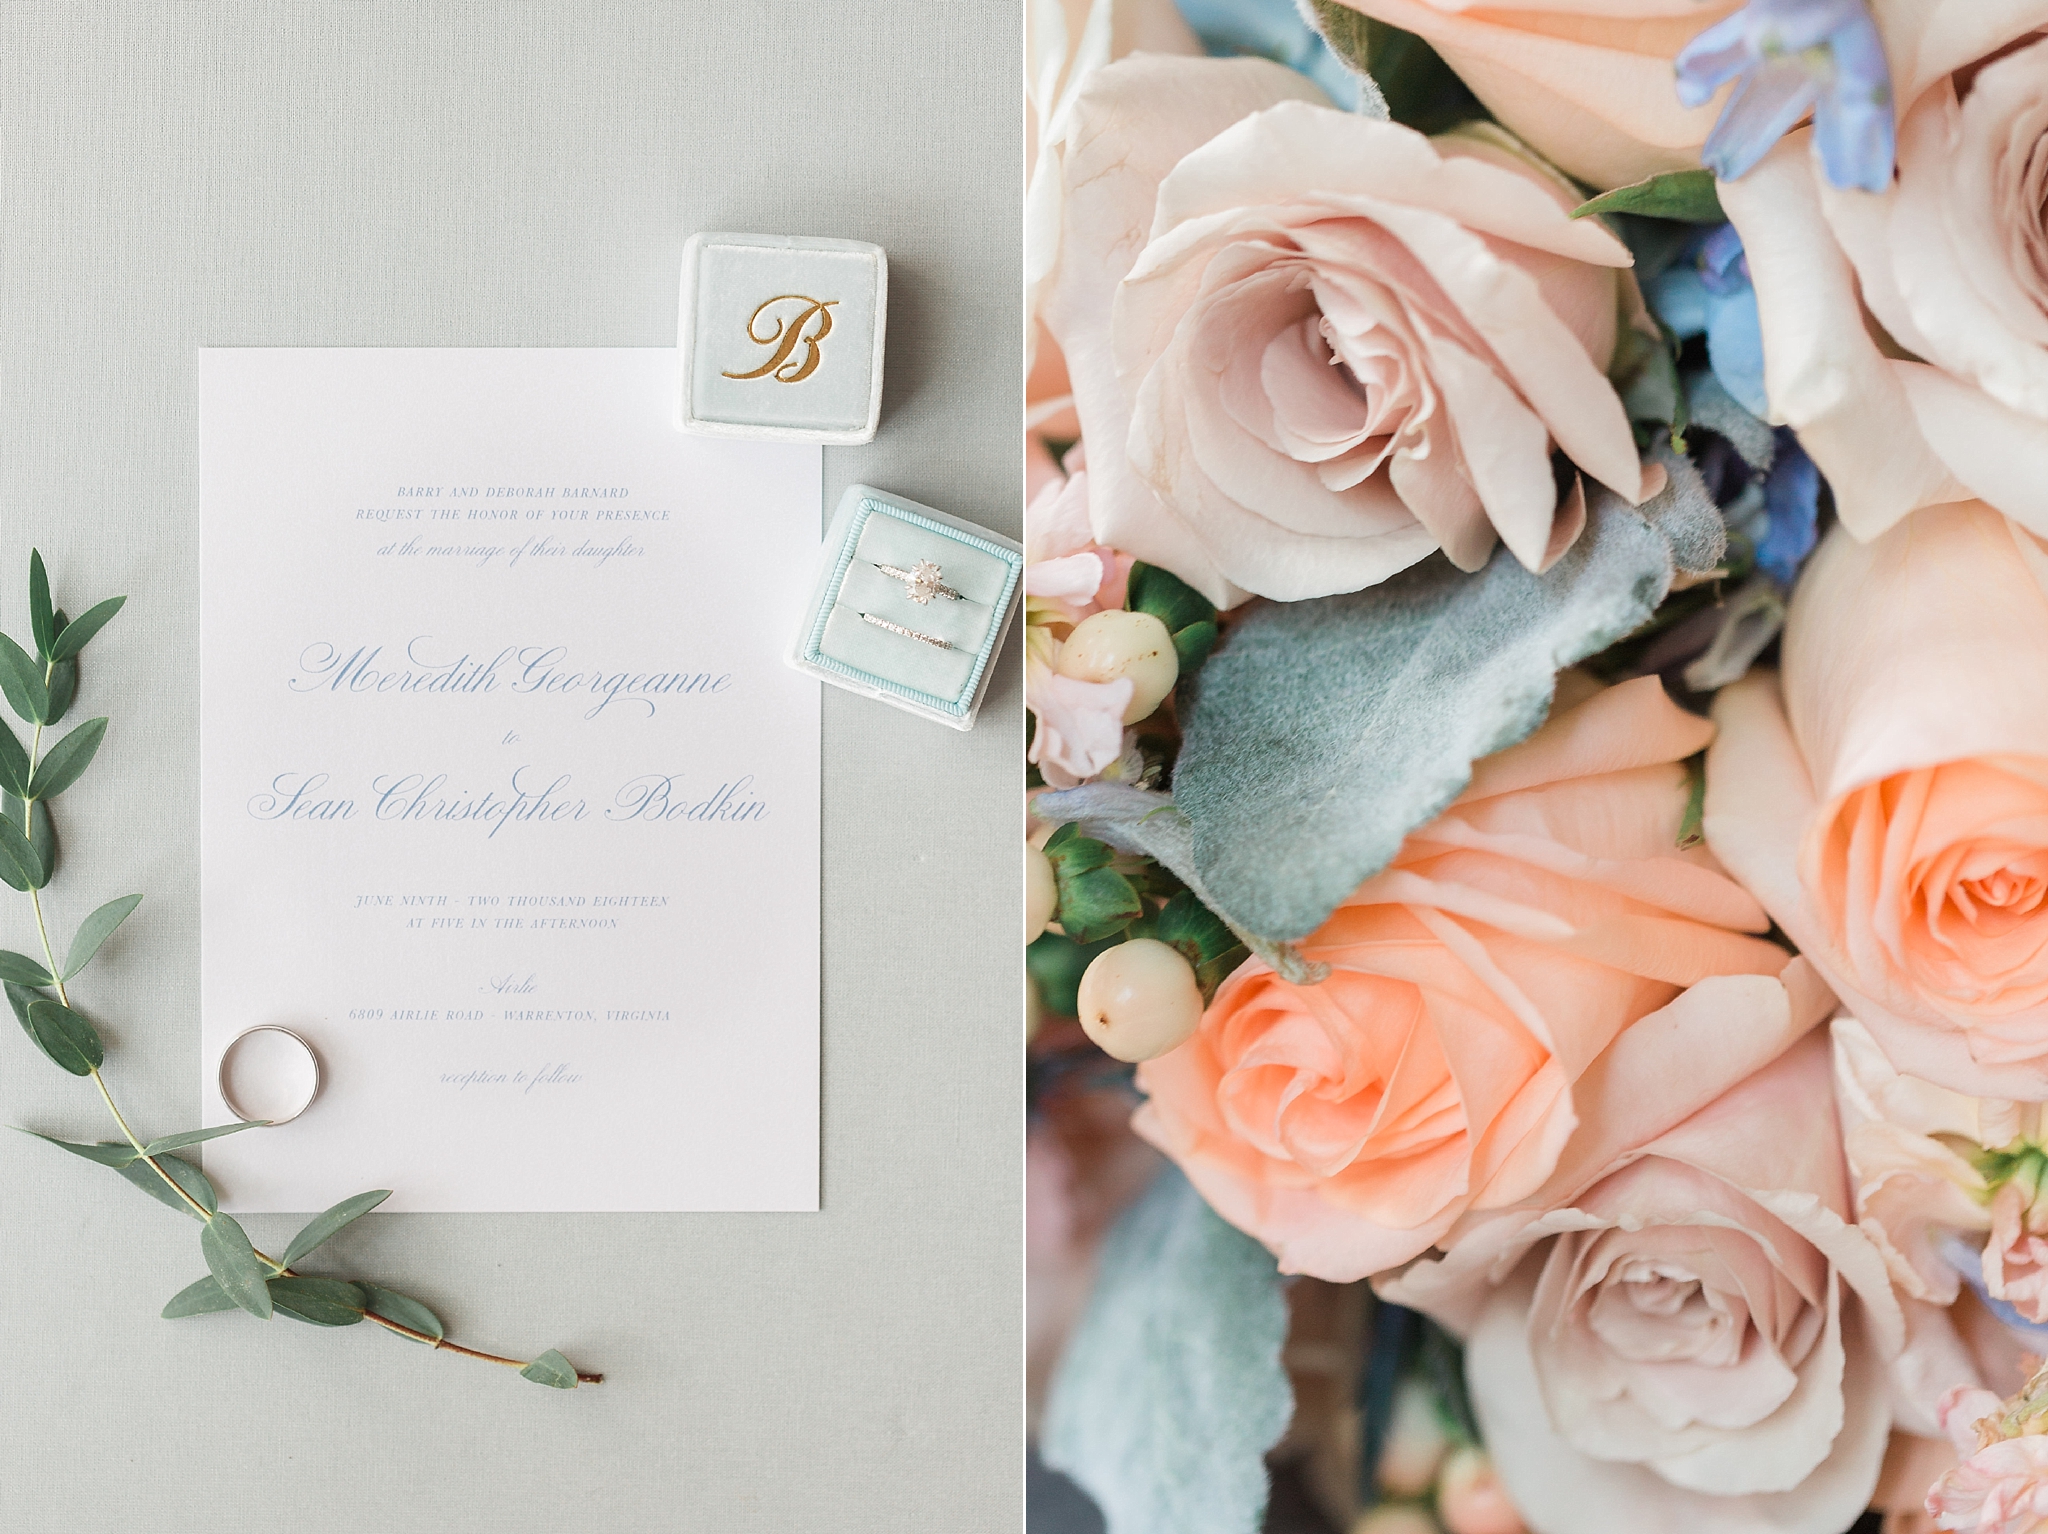 This chic summery Airlie wedding in Warrenton, VA was photographed by Washington, DC photographer, Alicia Lacey.